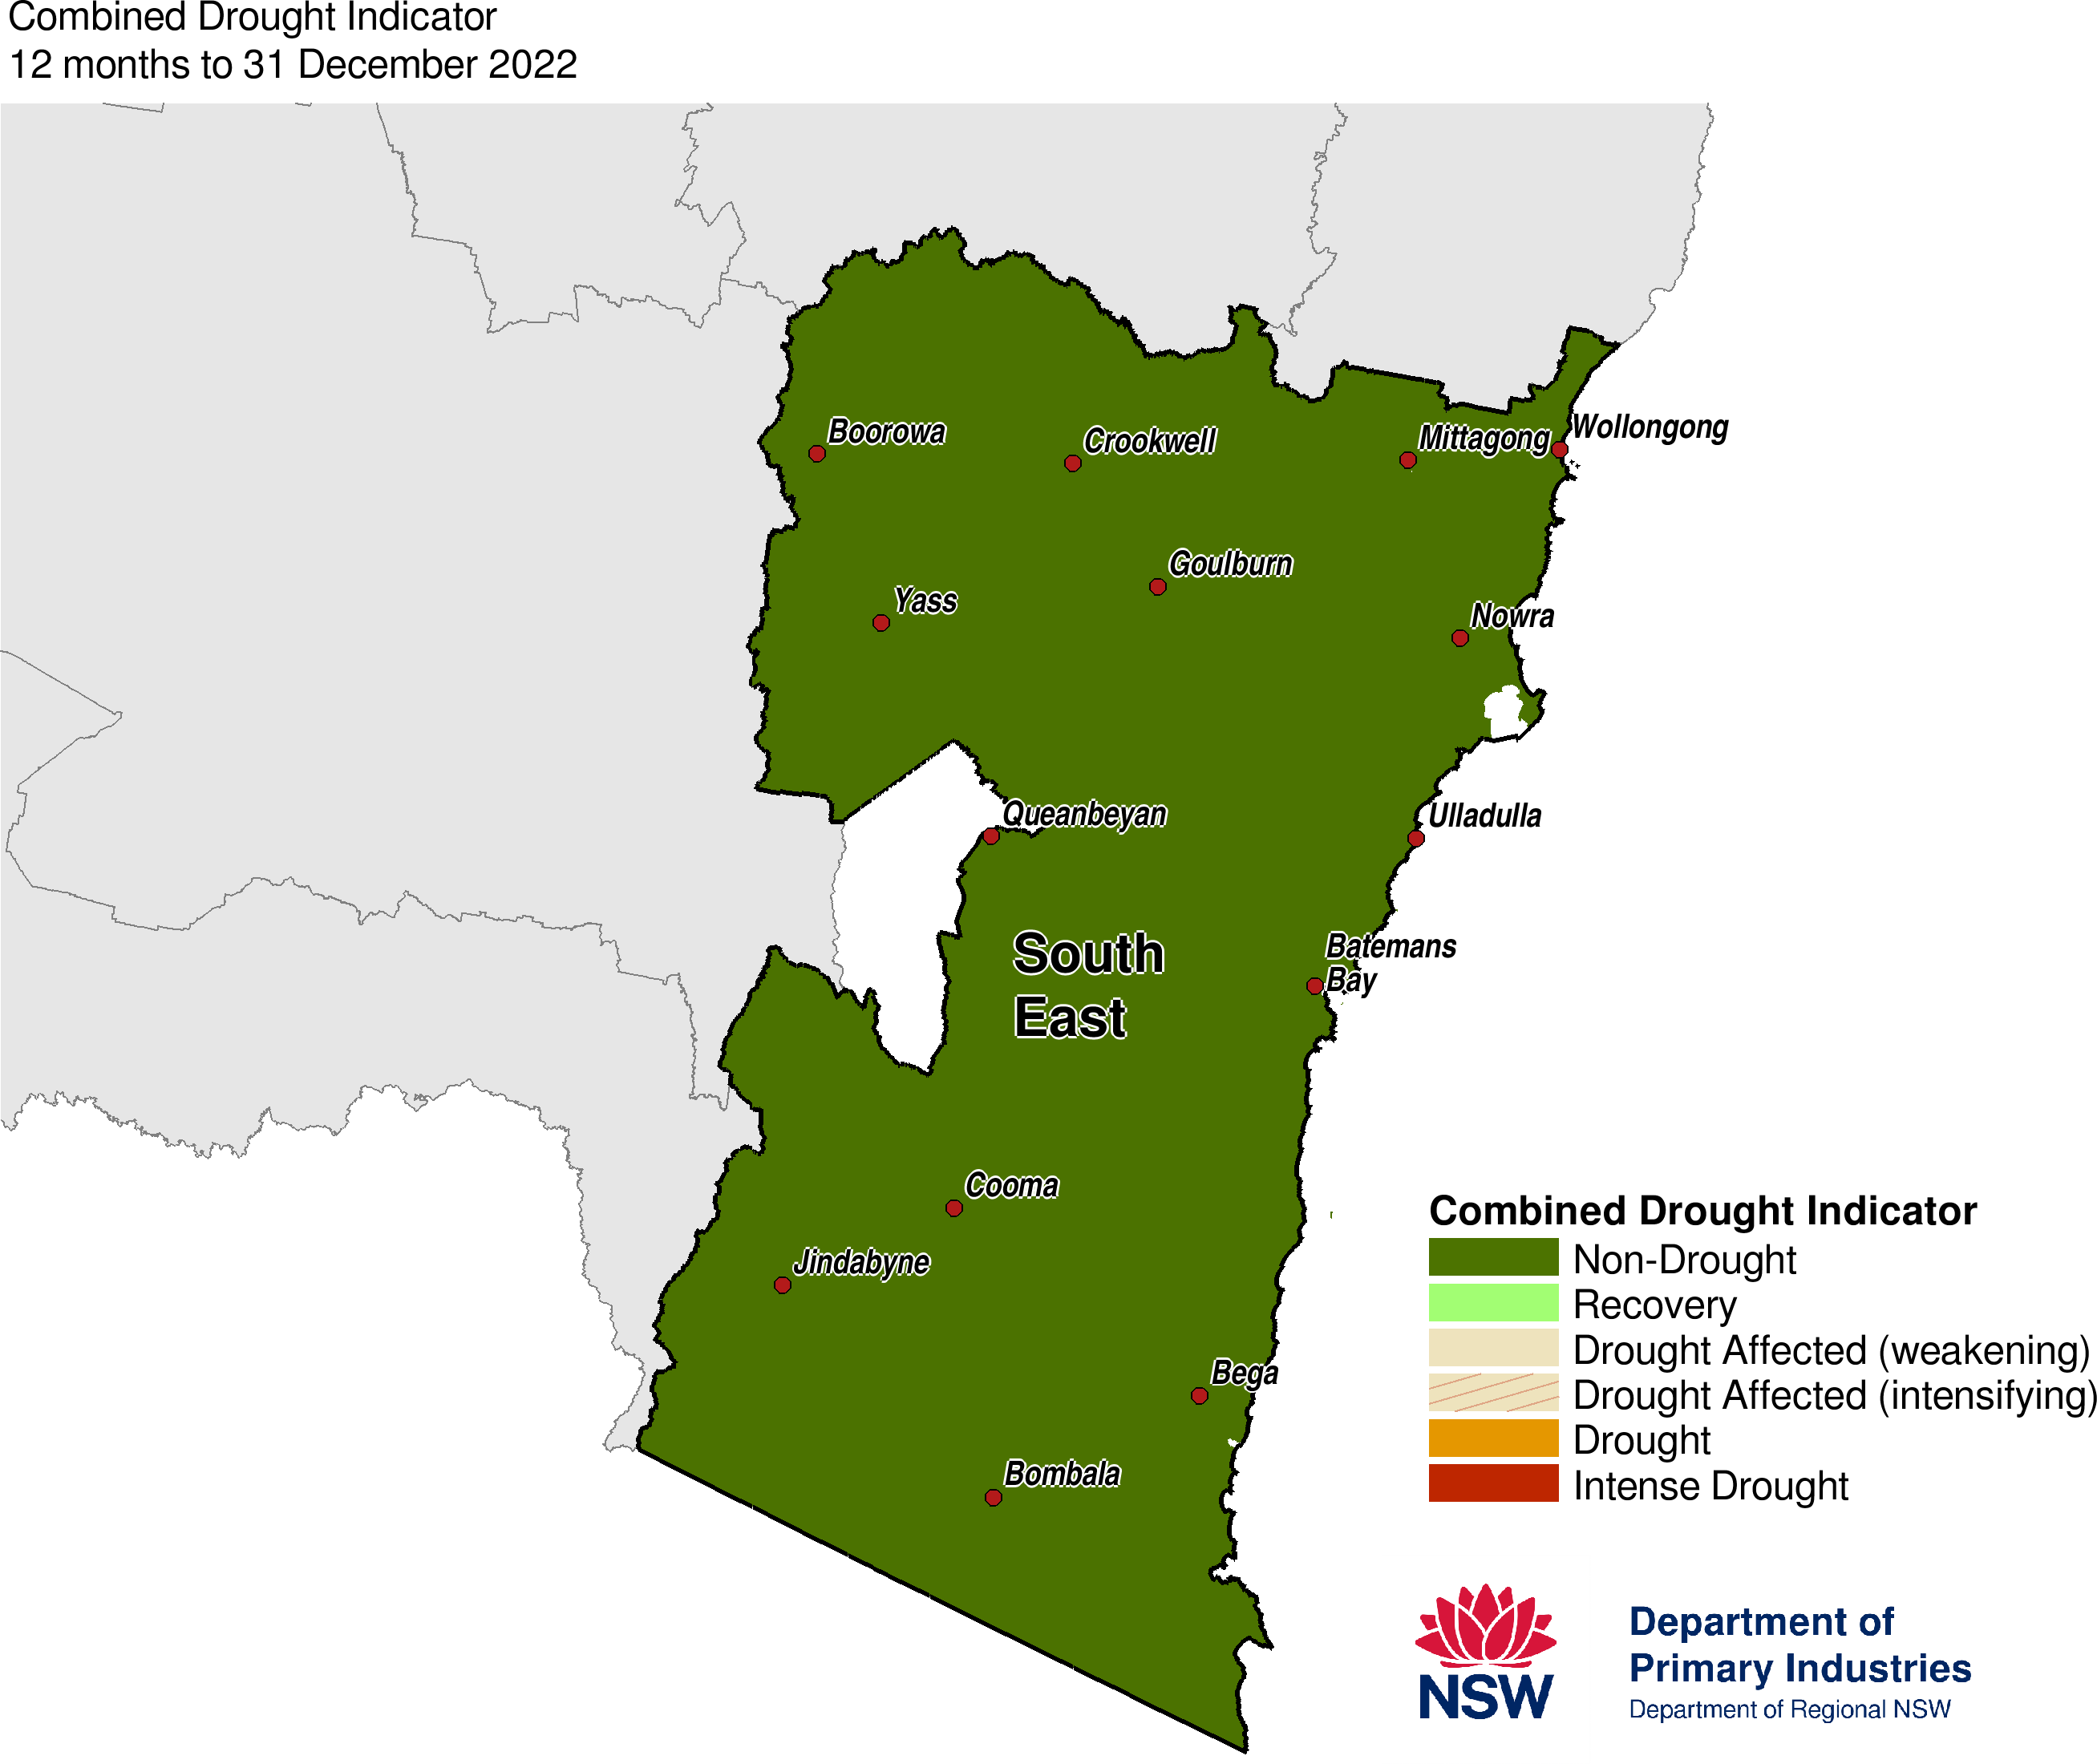 Figure 23. Combined Drought Indicator for the South East region 